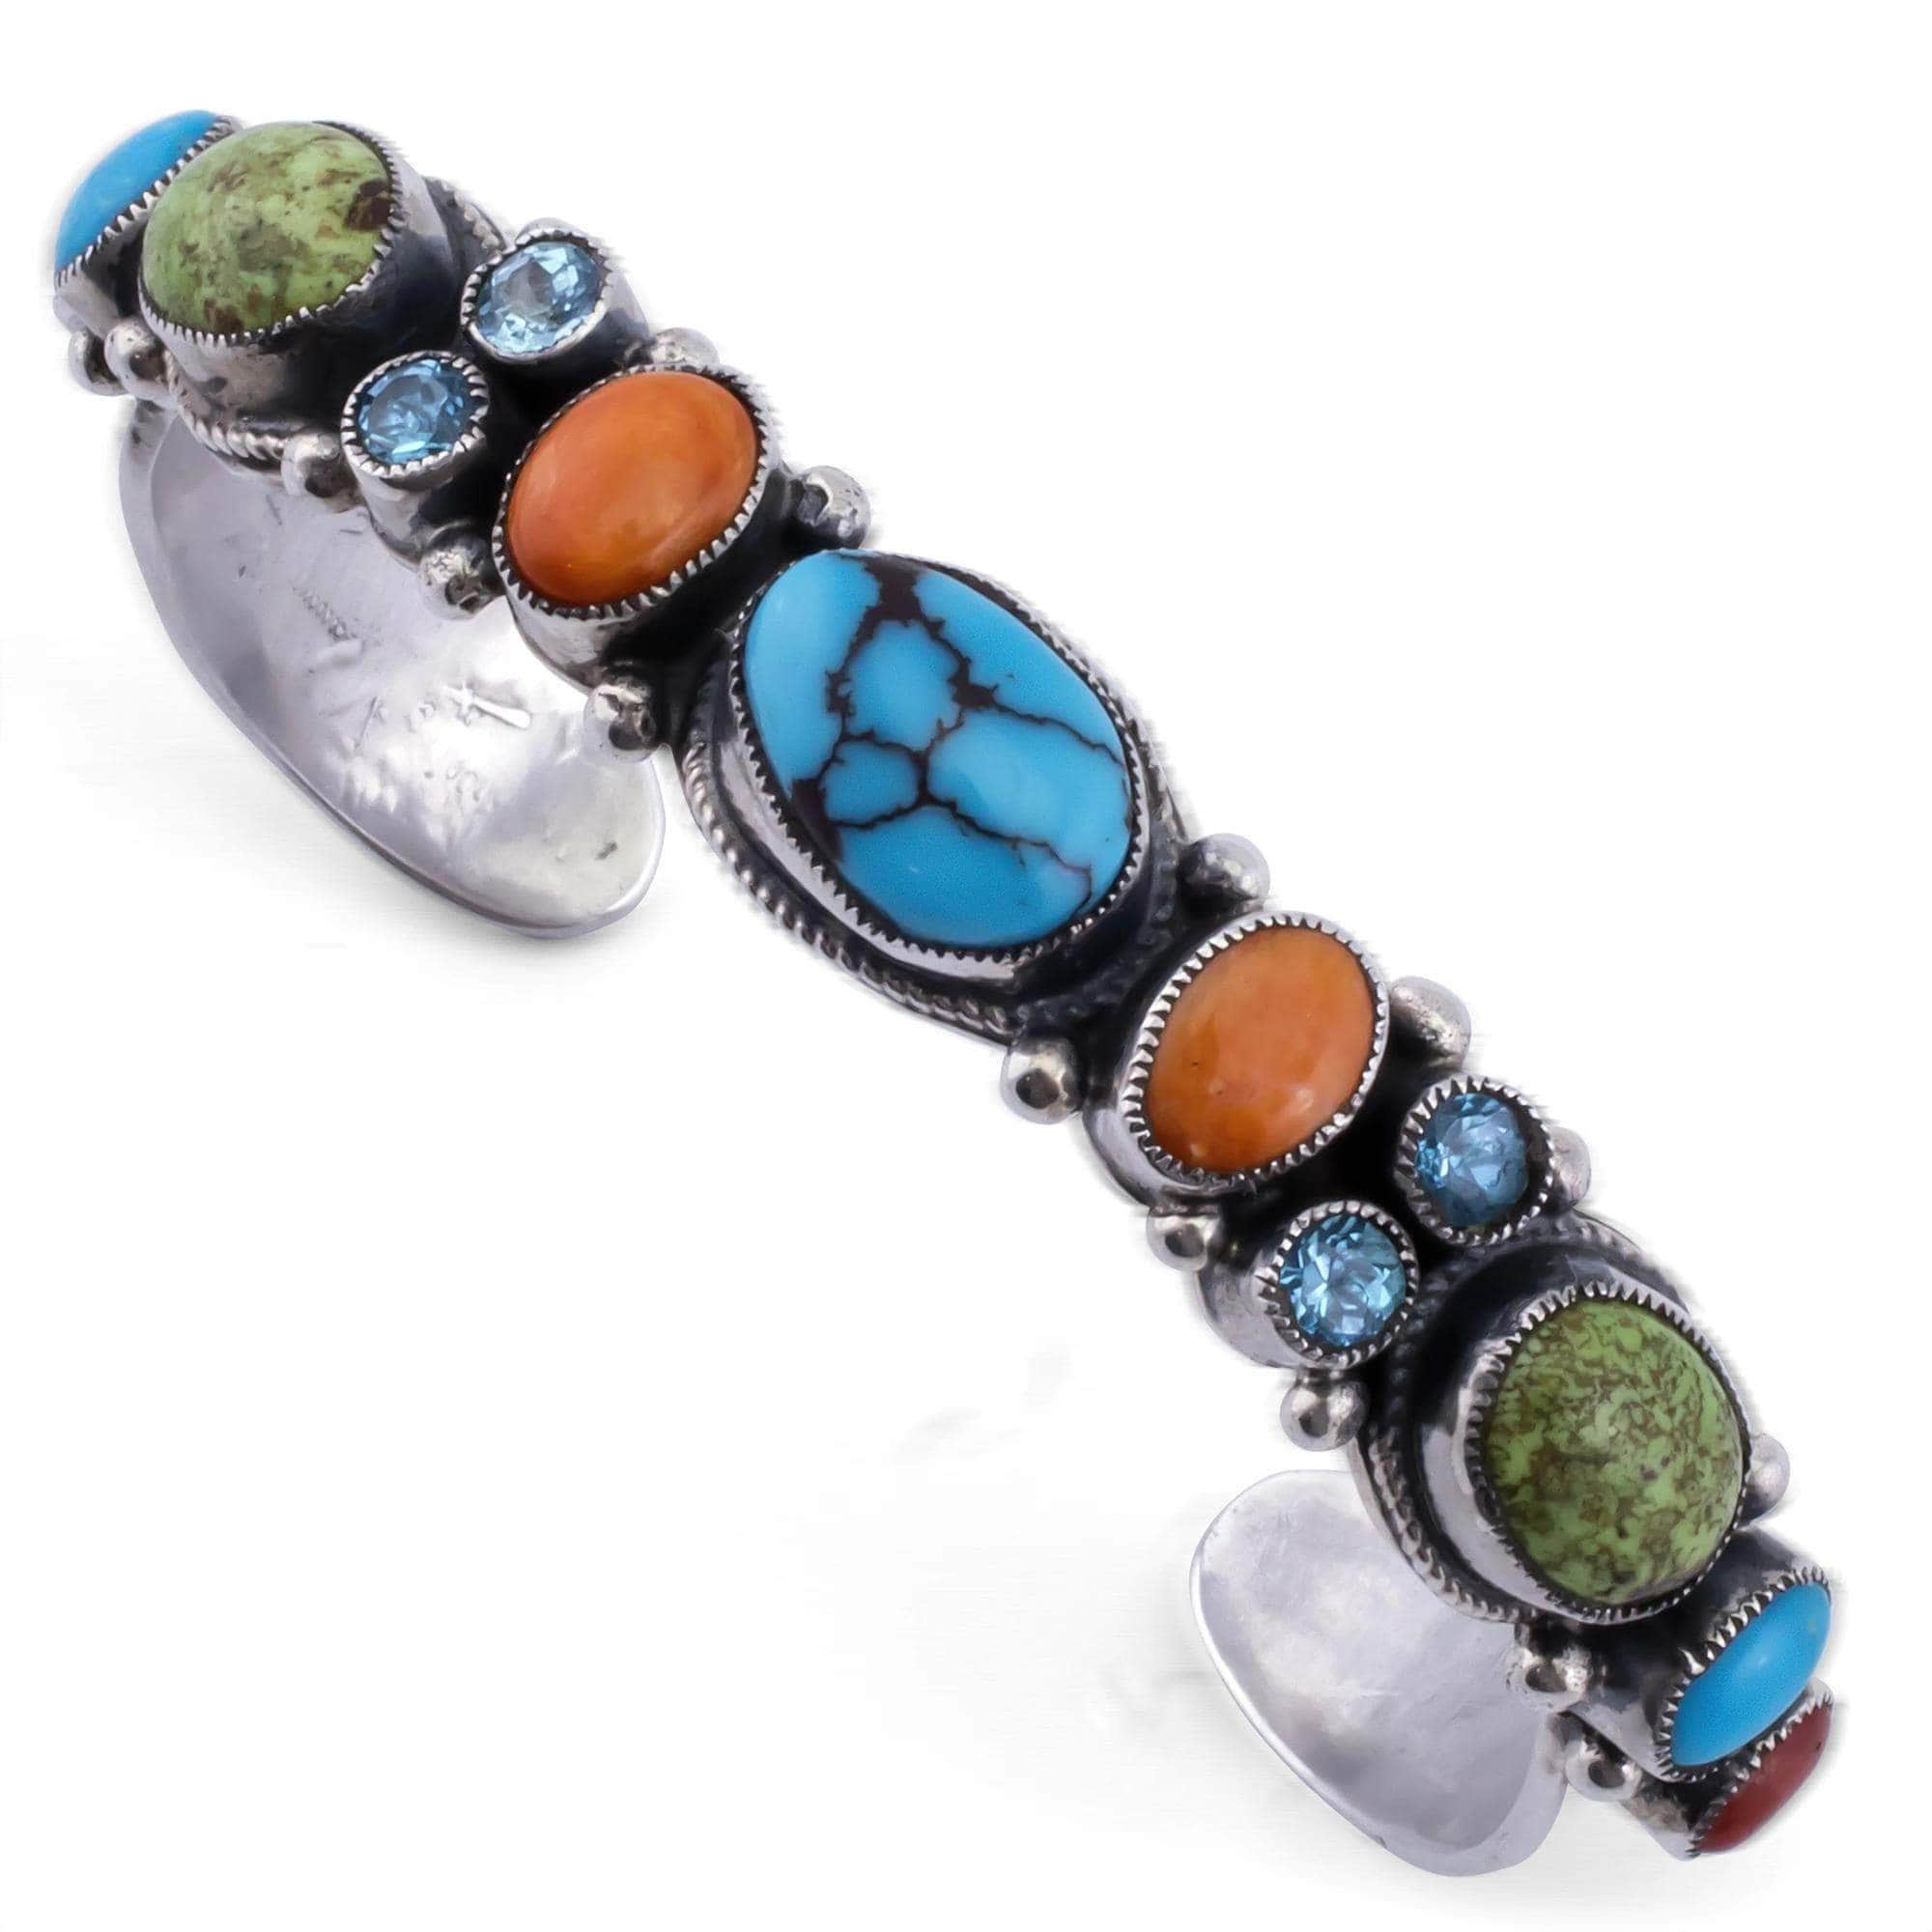 Kalifano Native American Jewelry Leo Feeney Sleeping Beauty Turquoise, Blue Topaz, Spiny Oyster Shell, and Gaspite USA Native American Made 925 Sterling Silver Cuff NAB1800.009